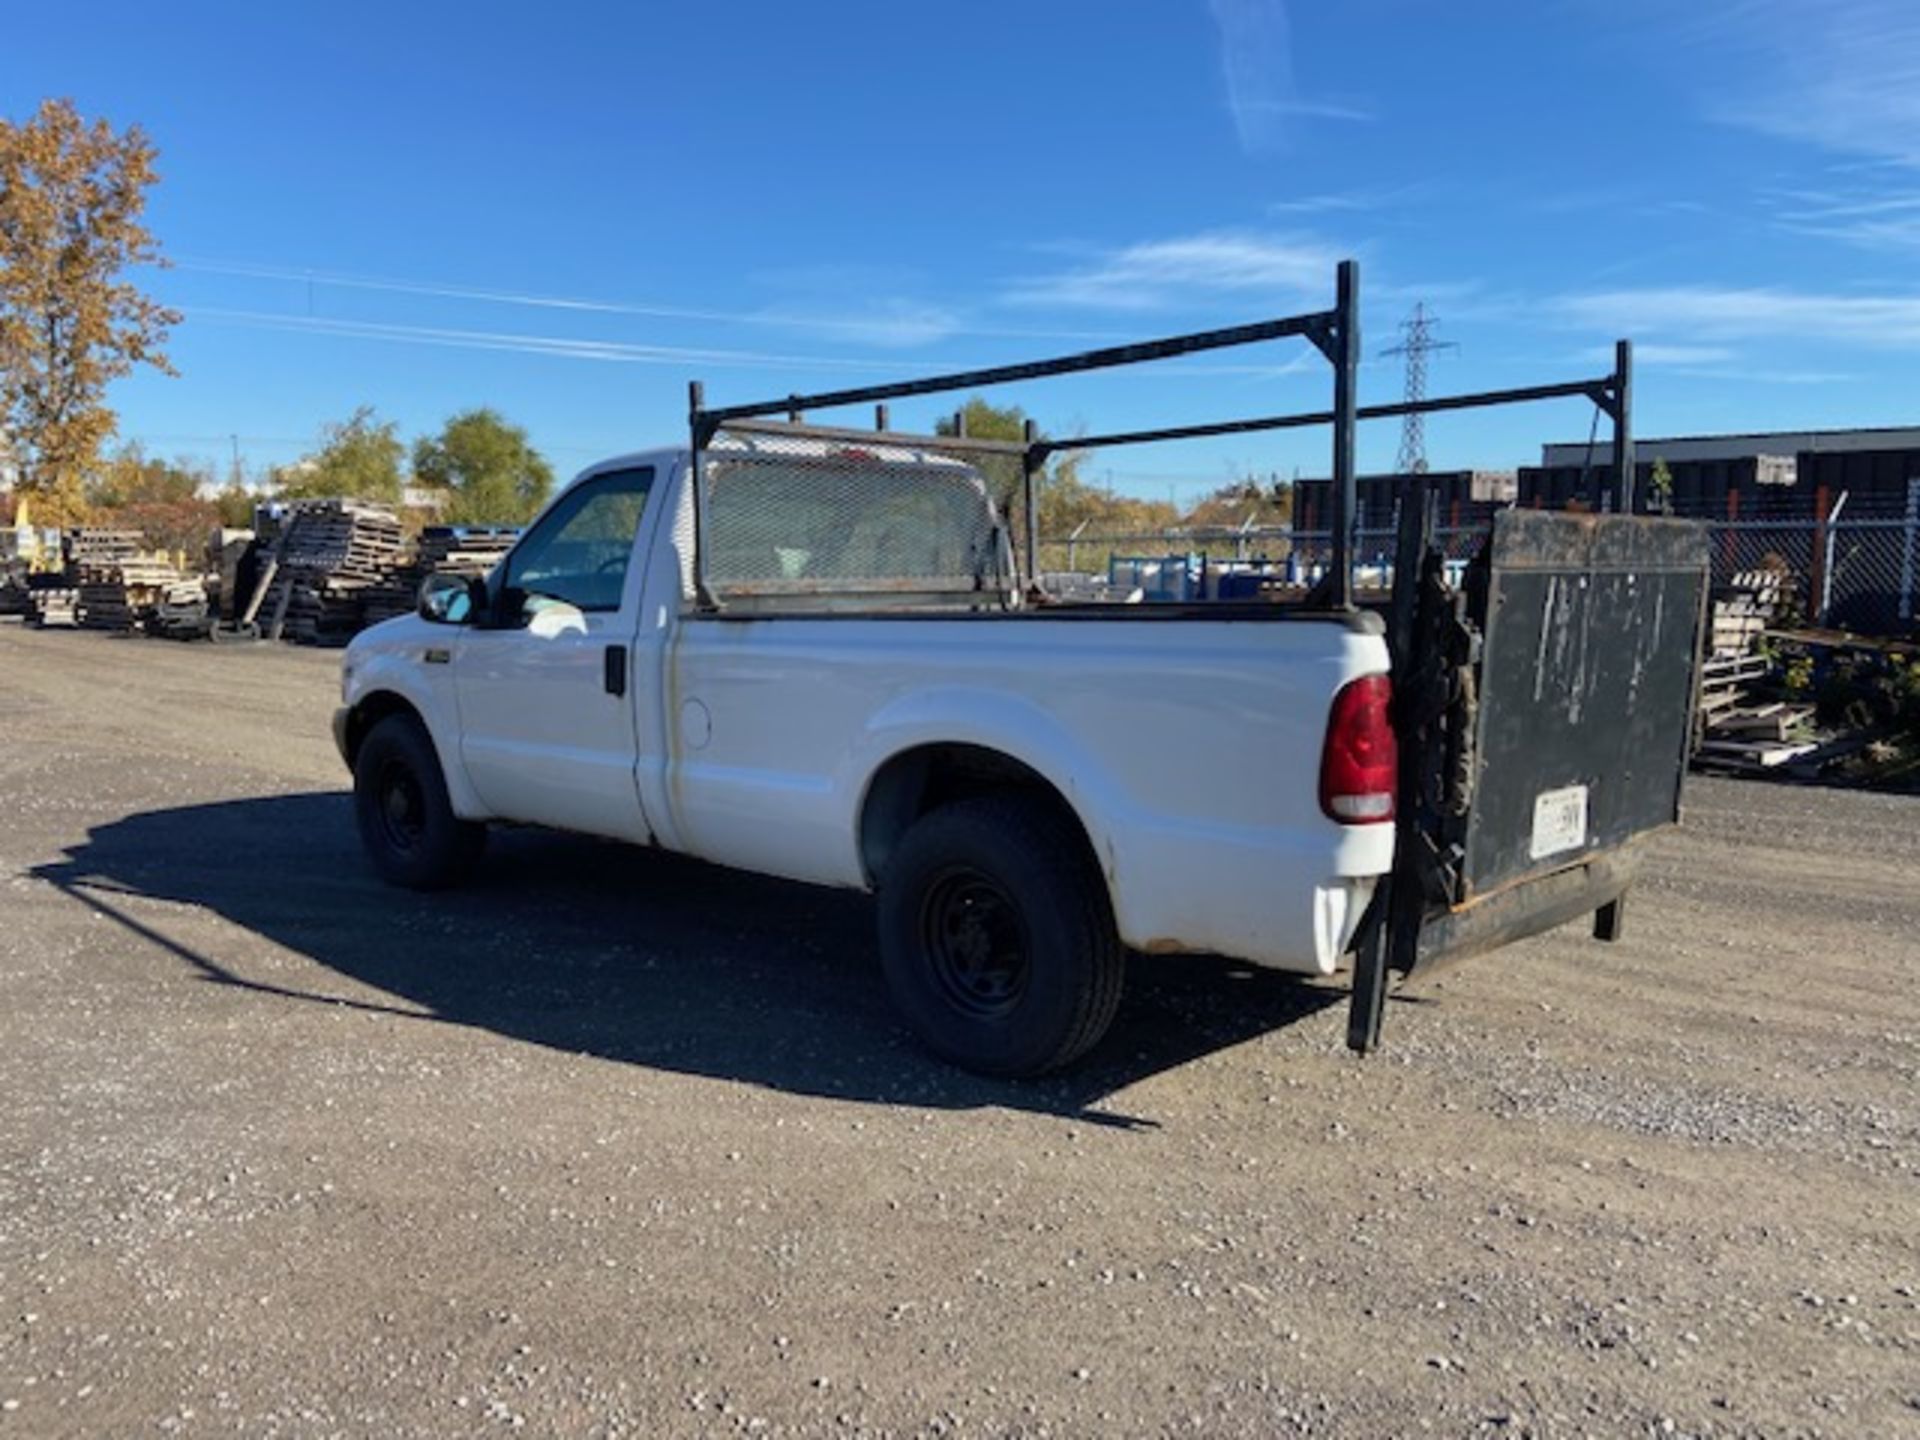 2002 Ford F-350 Pickup Truck with Hydraulic Lift Gate and Racks - NEW 2016 engine - 140,000km - Image 2 of 6